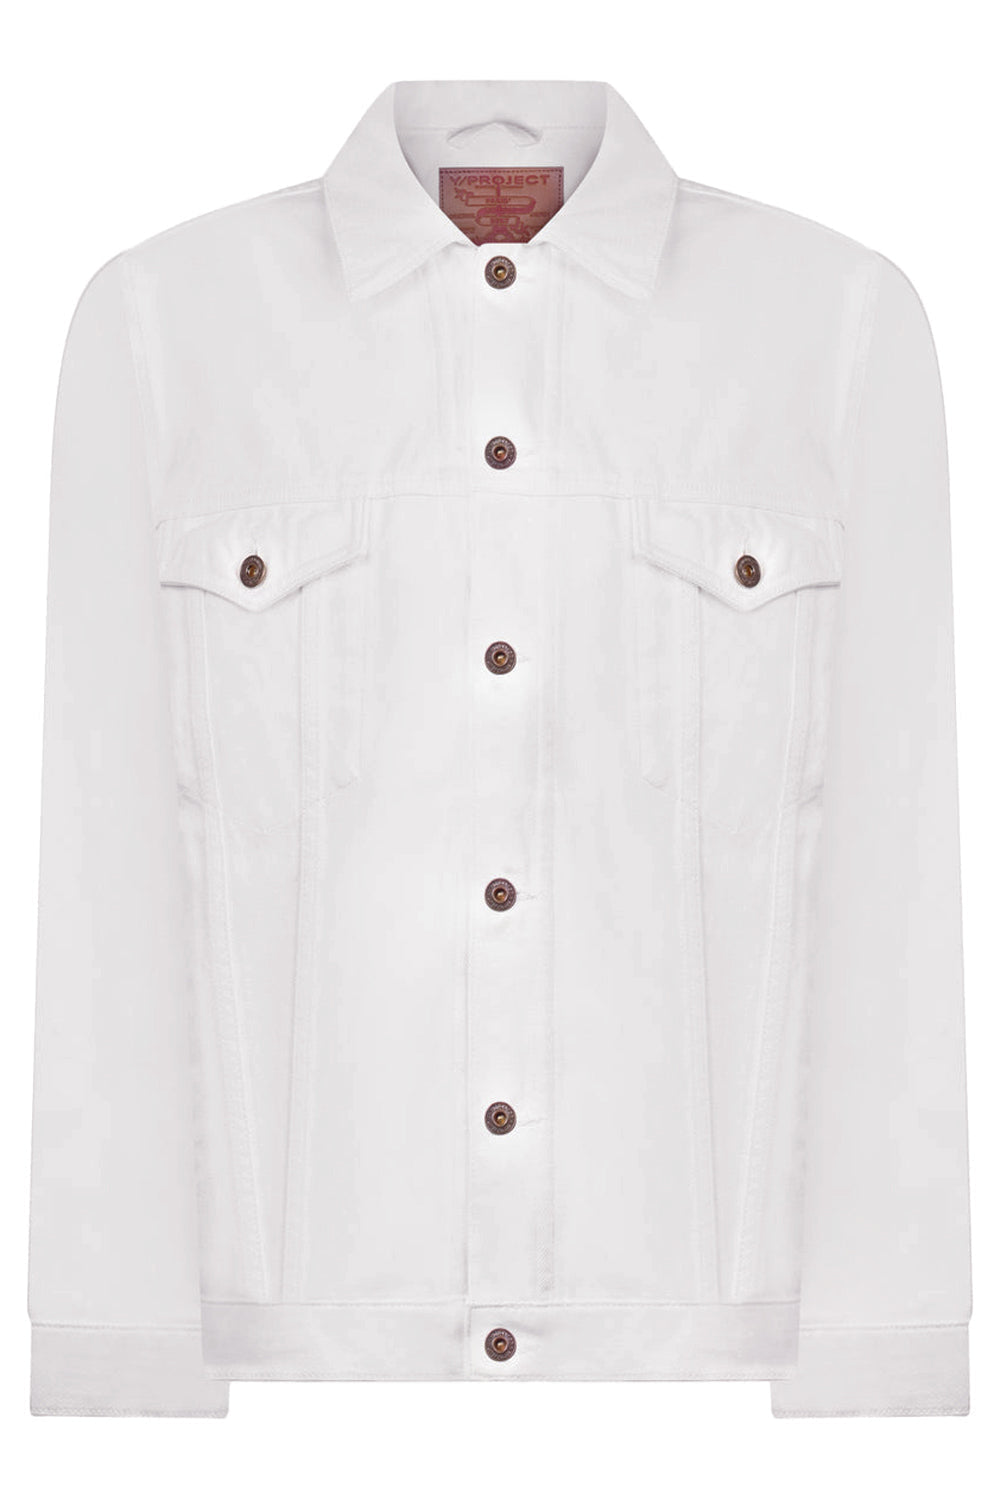 Y/PROJECT JACKETS CLASSIC WIRE DENIM JACKET | WHITE